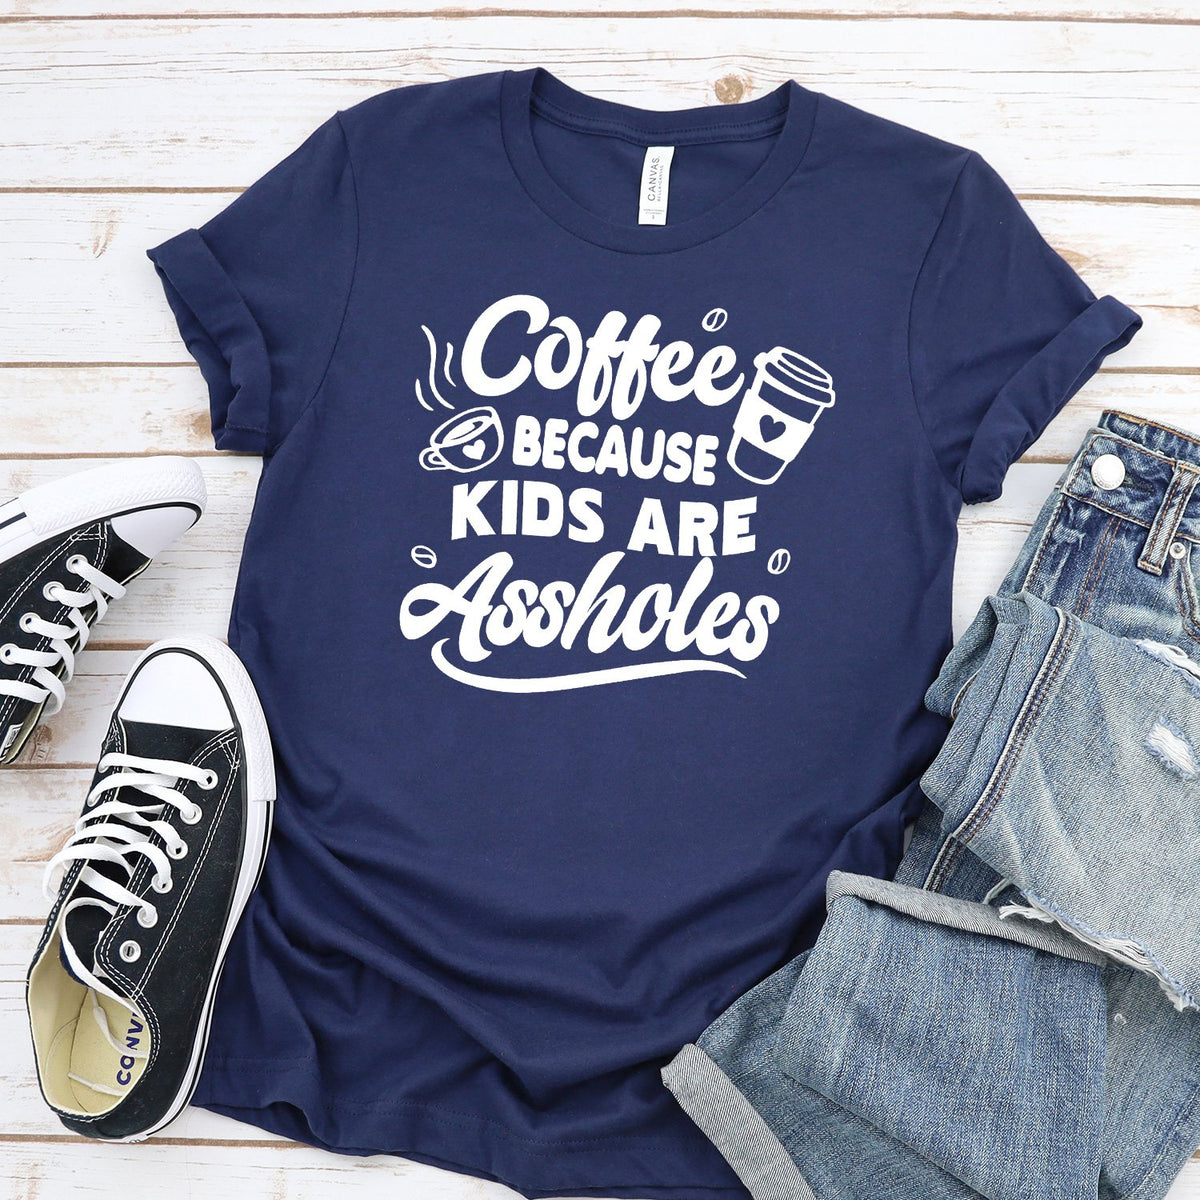 Coffee Because Kids are Assholes - Short Sleeve Tee Shirt